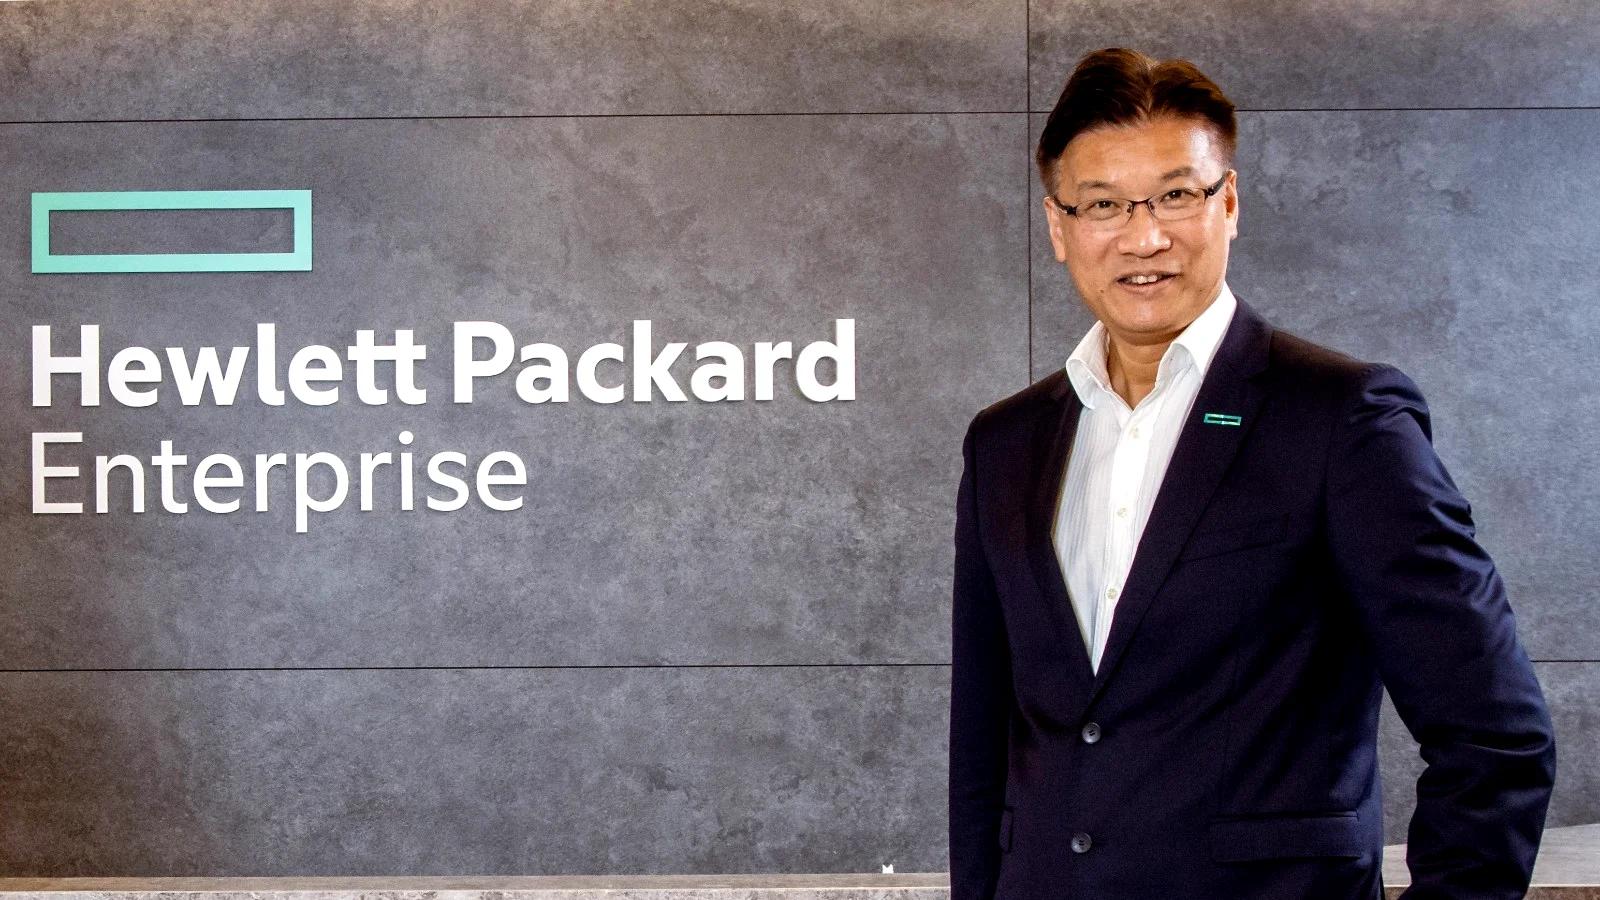 hewlett packard enterprise new ceo - Who is the CEO of HPE com